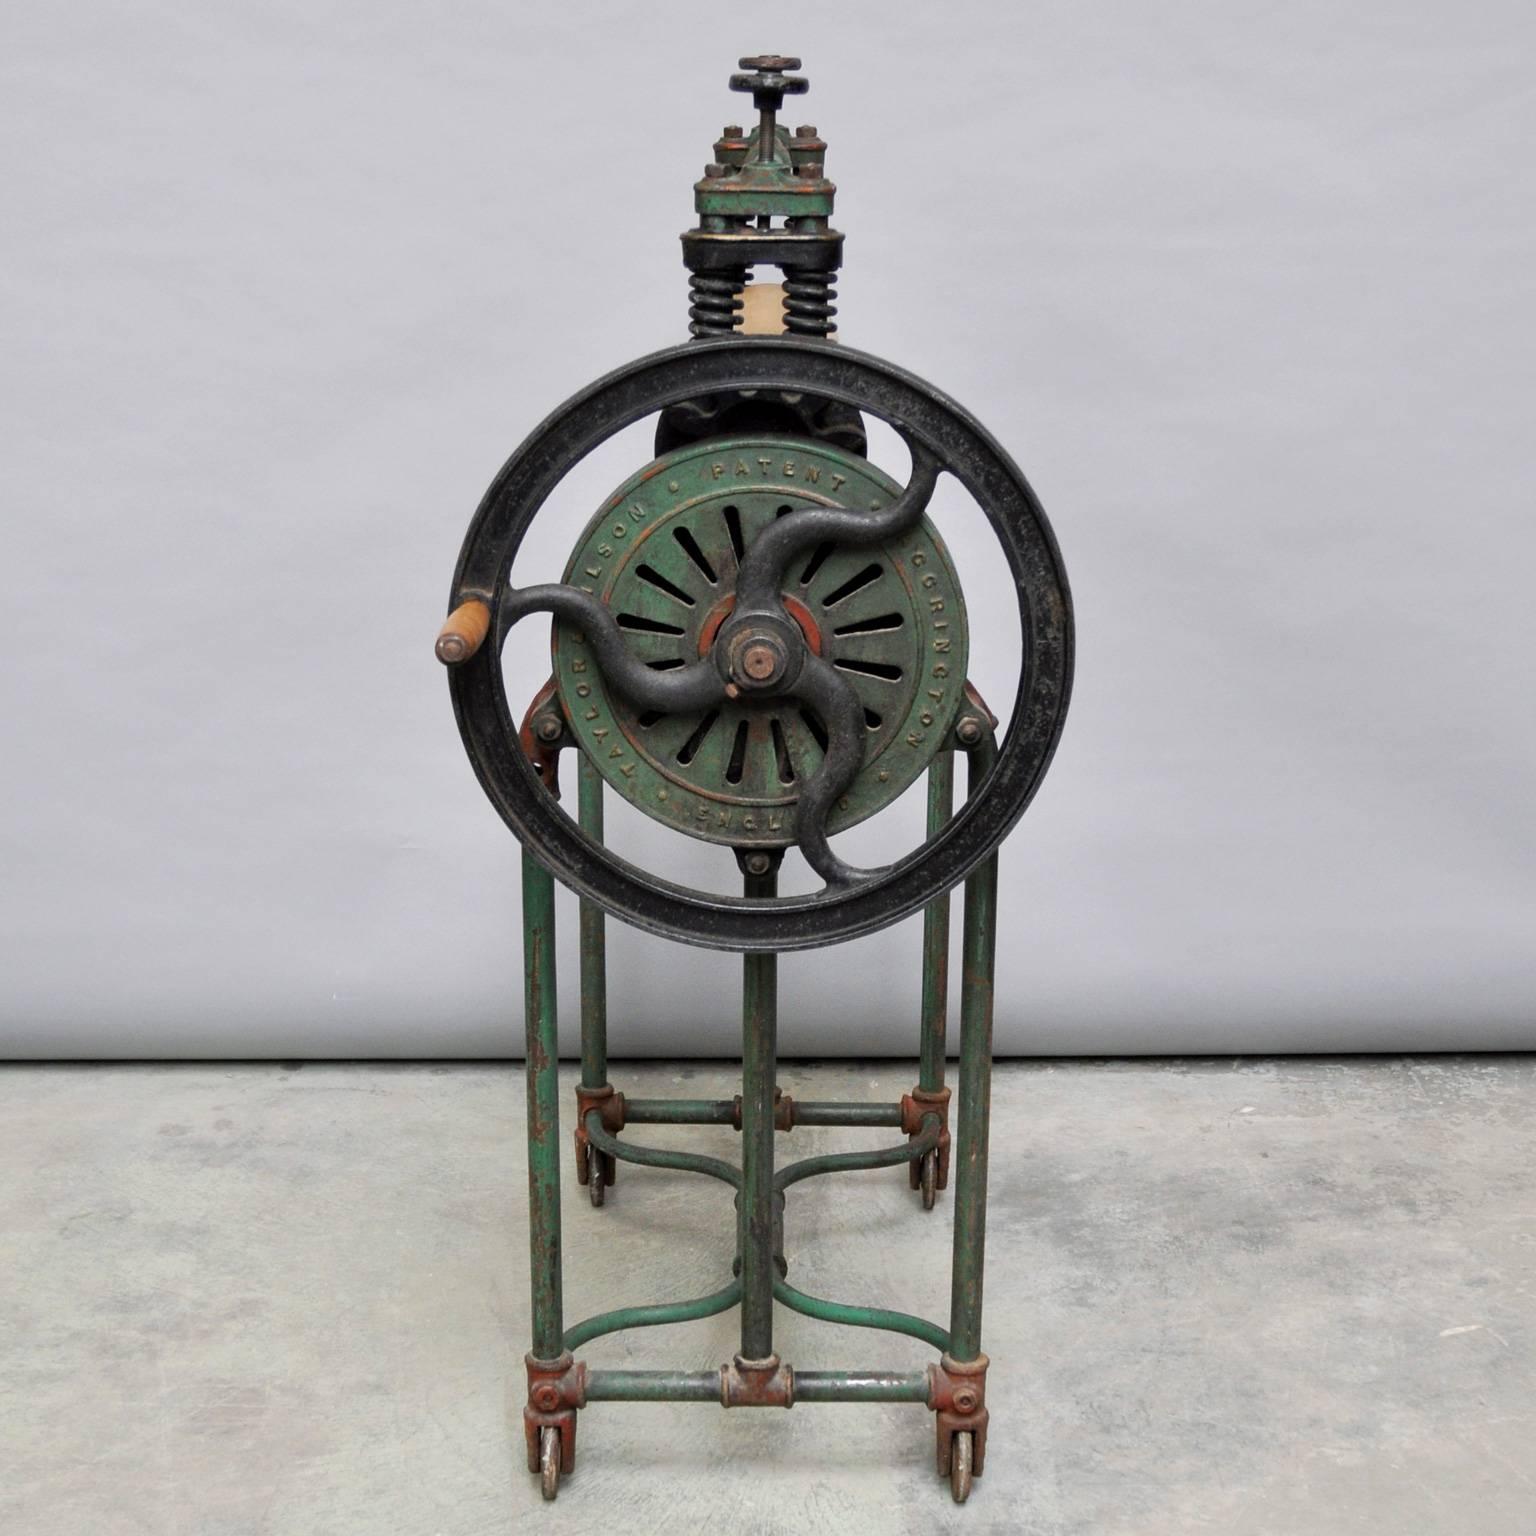 A large iron framed manual machine with two cylinders for rolling and pressing washed clothes, connected by cogs and manually operated by turning a side wheel with a large crank handle.
 